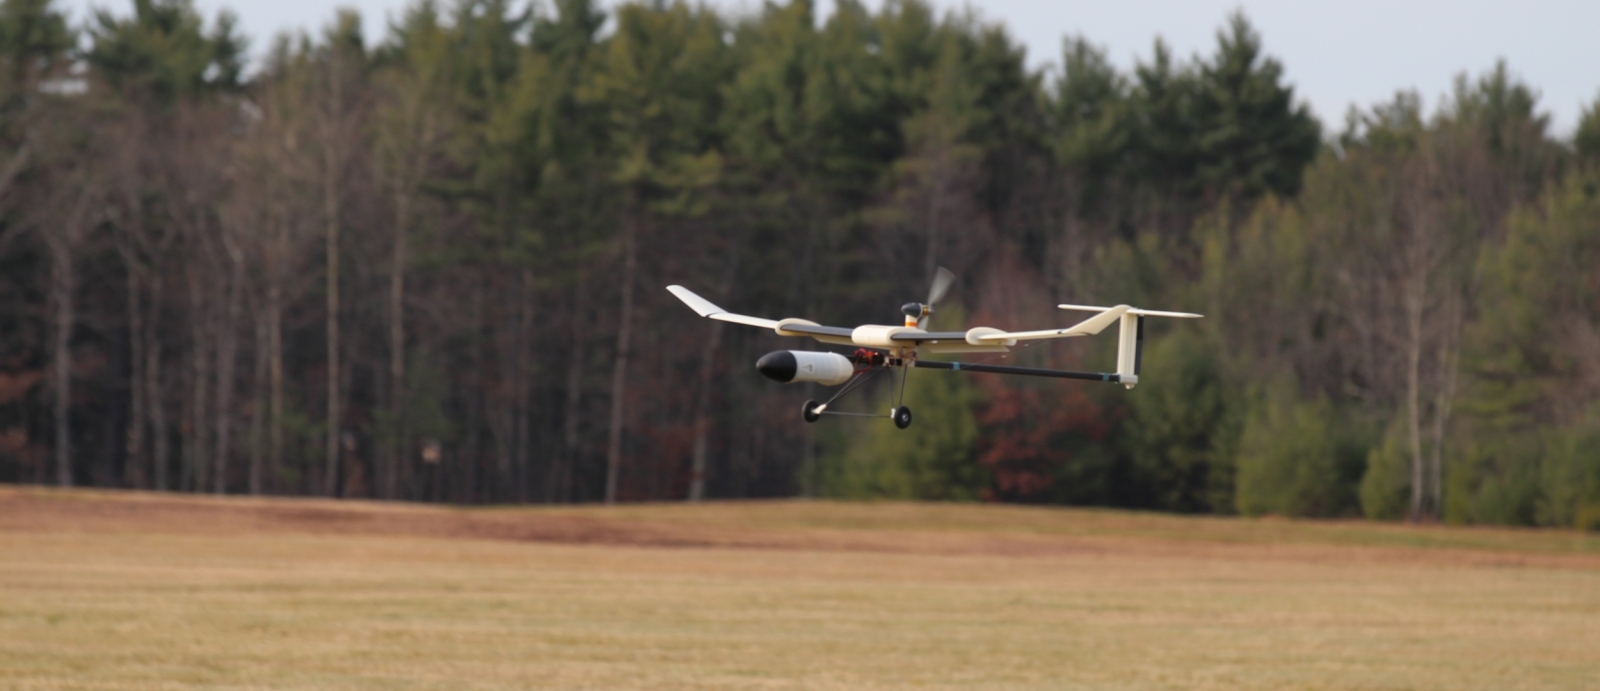 The Variable Airspeed Telescoping wing Additive manufactured Unmanned Aerial Vehicle (VAST AUAV). 